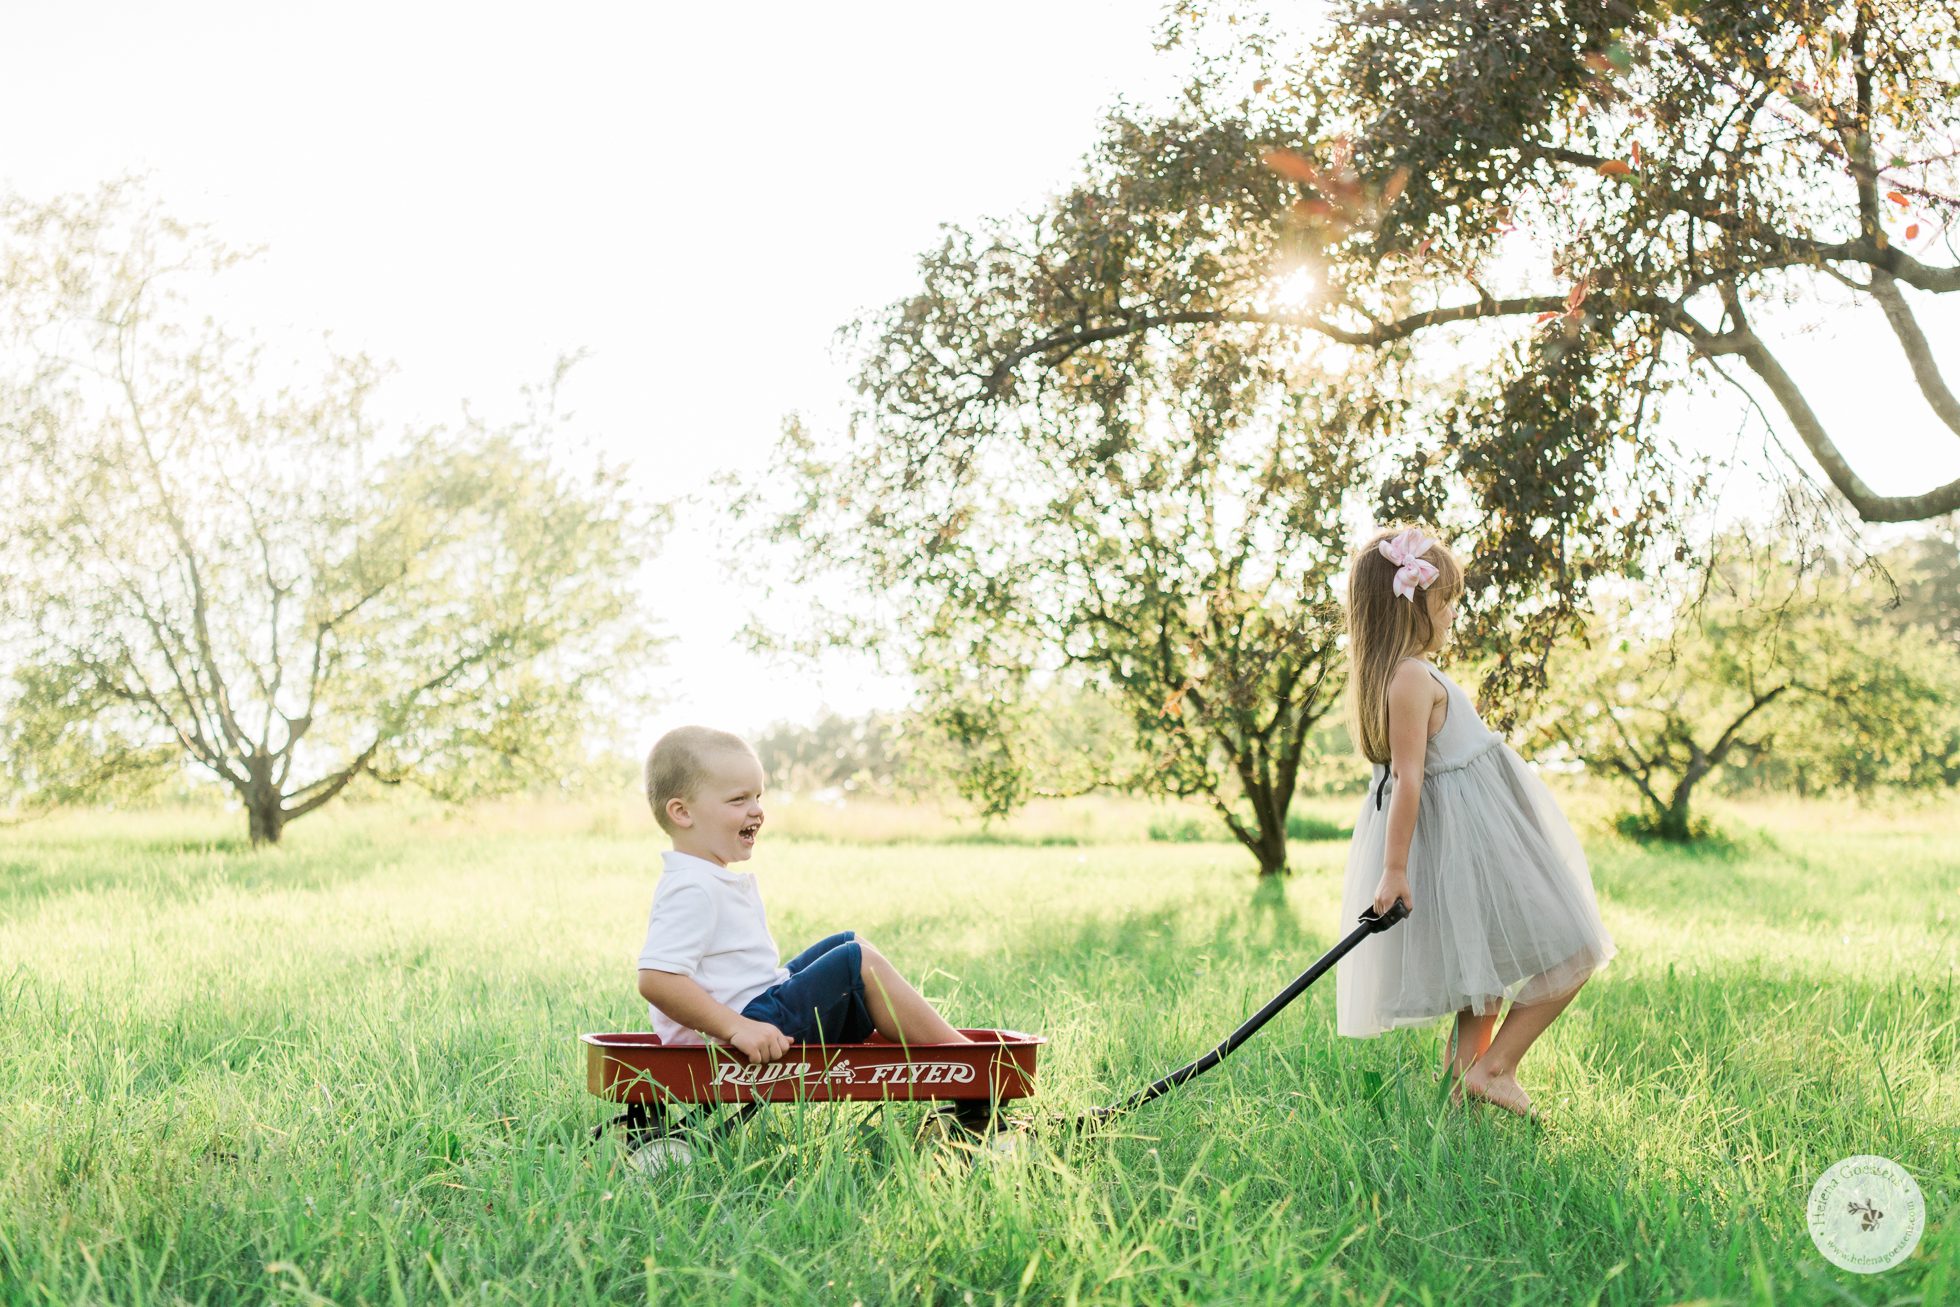 siblings playing in a field on a little red wagon. Image by Helena Goessens Photography.